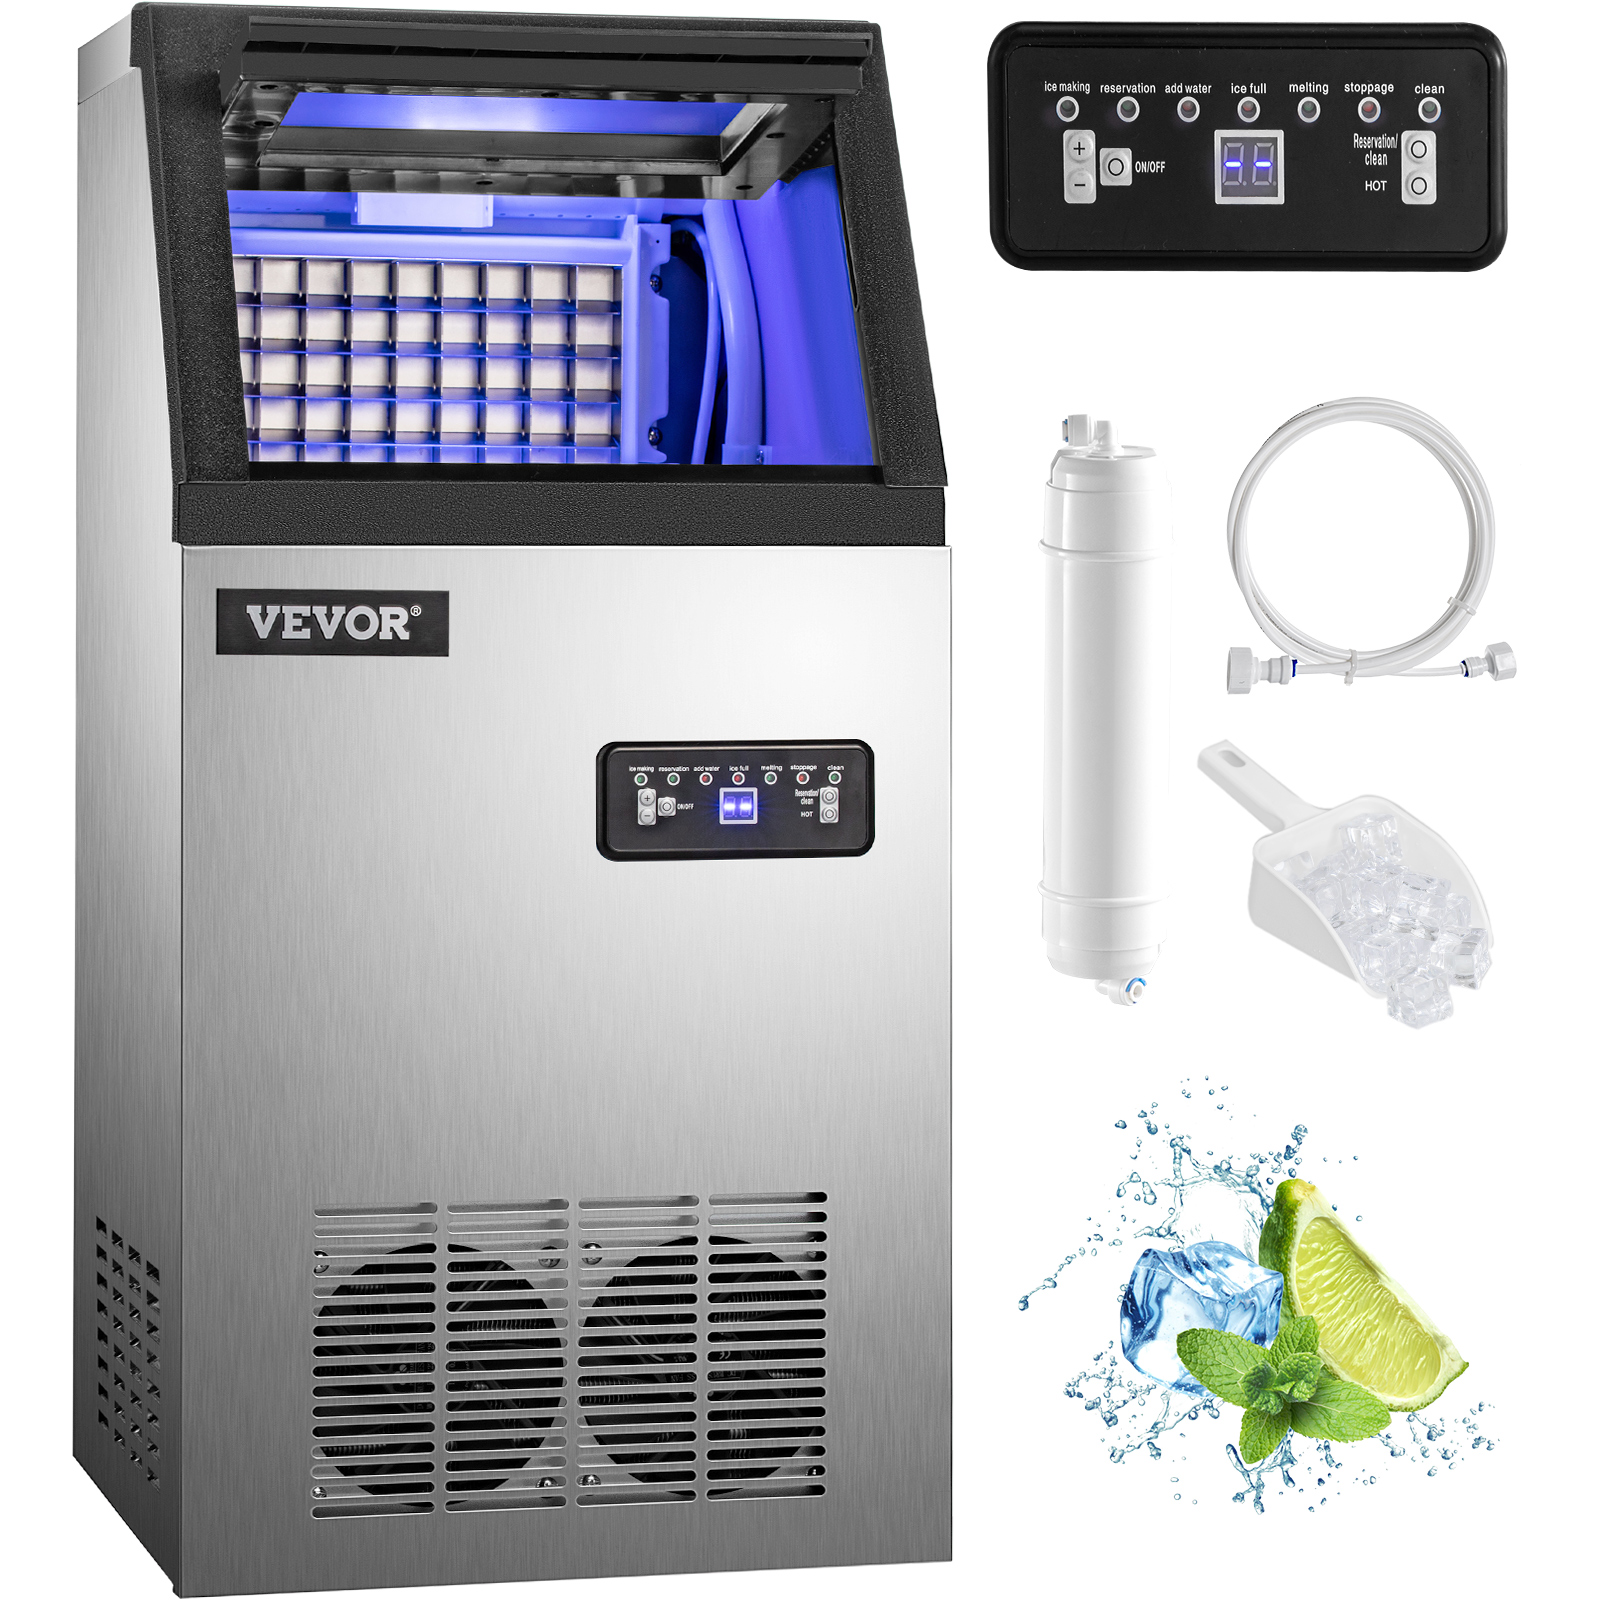 VEVOR Portable Ice Maker: 62lbs in 24Hrs, Auto Self Cleaning